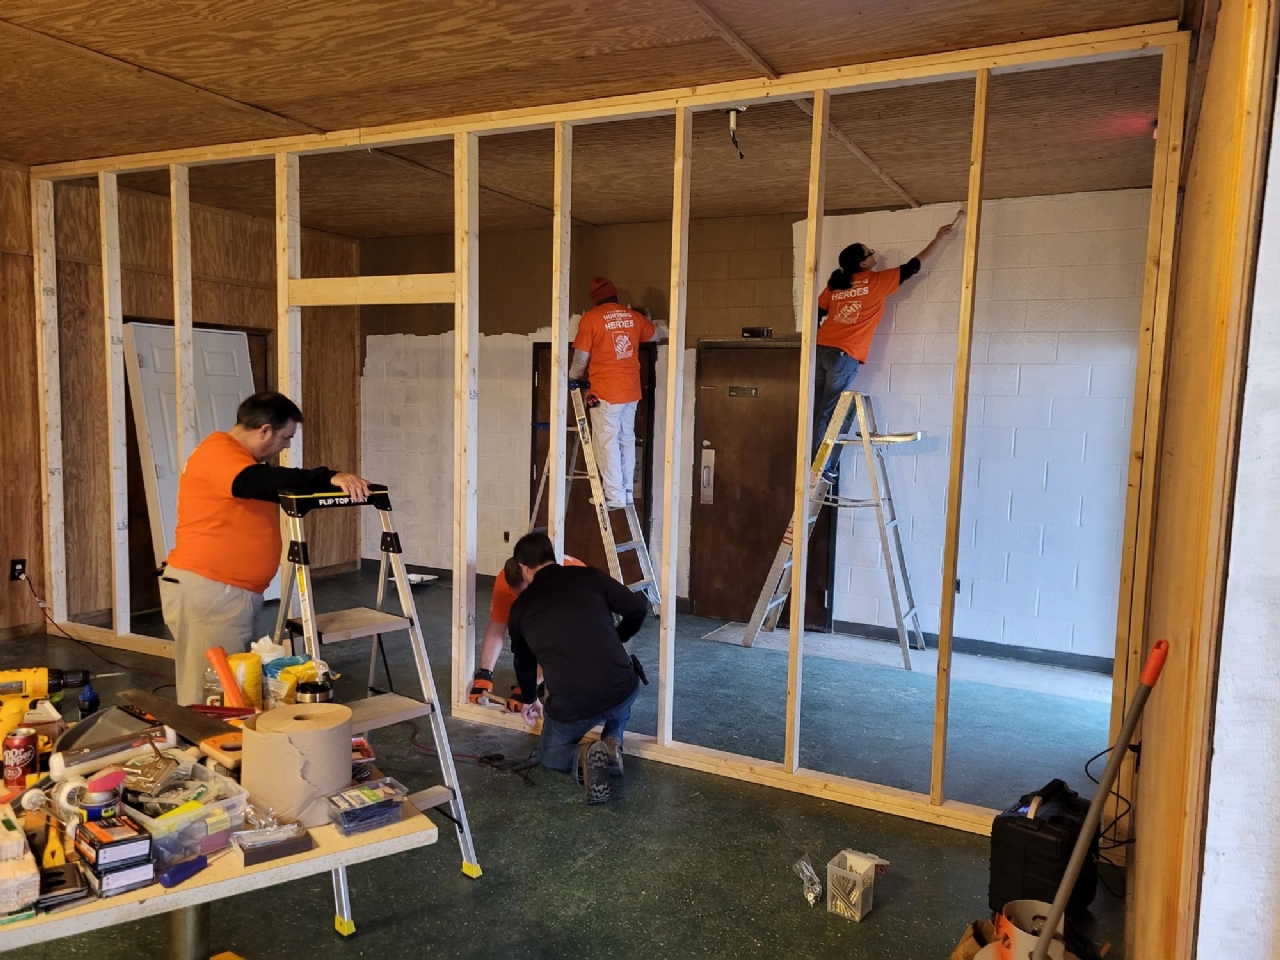 Home Depot donated supplies and labor in building a new room for the Auxiliary.